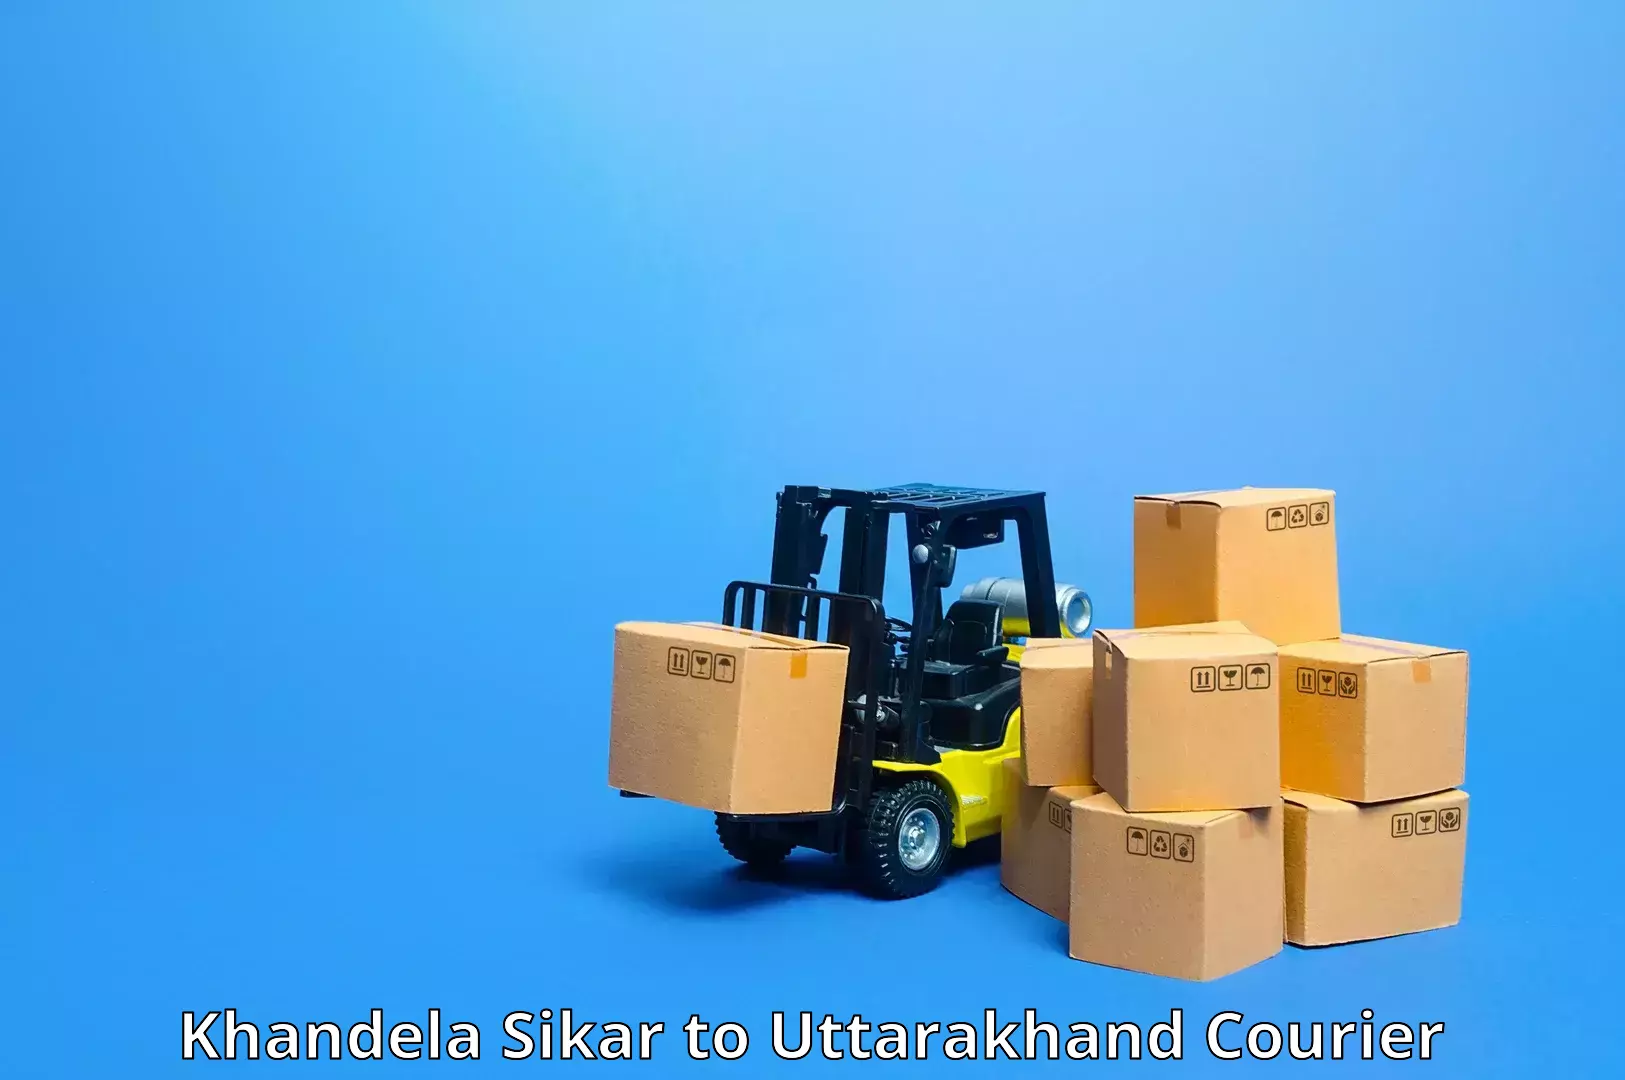 Cost-effective courier solutions Khandela Sikar to Pithoragarh